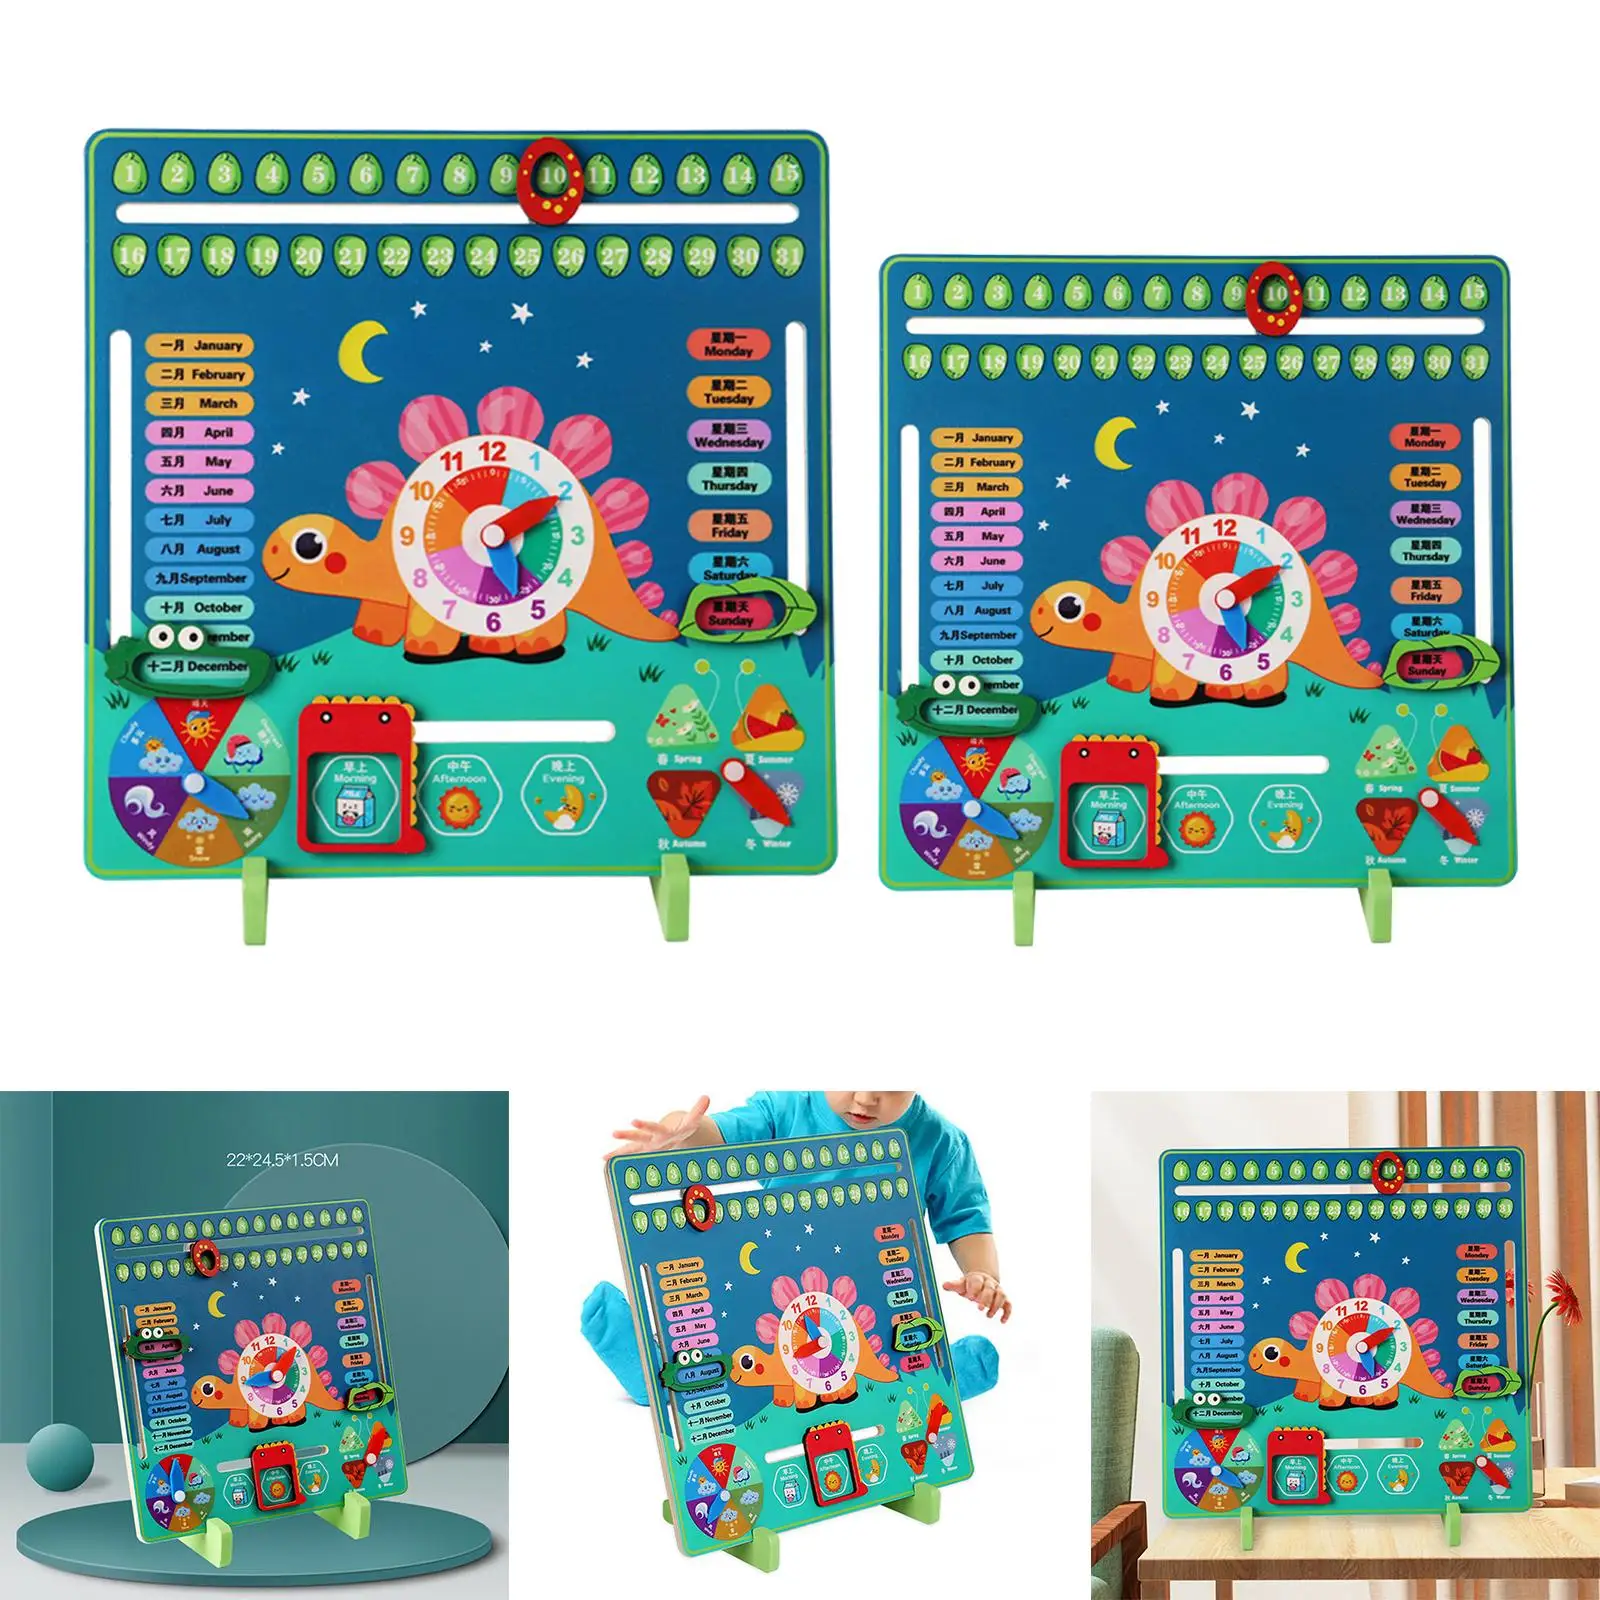 Wooden Learning Calendar Weather Season Time Cognitive Puzzles Learning Educational Toy for Girls